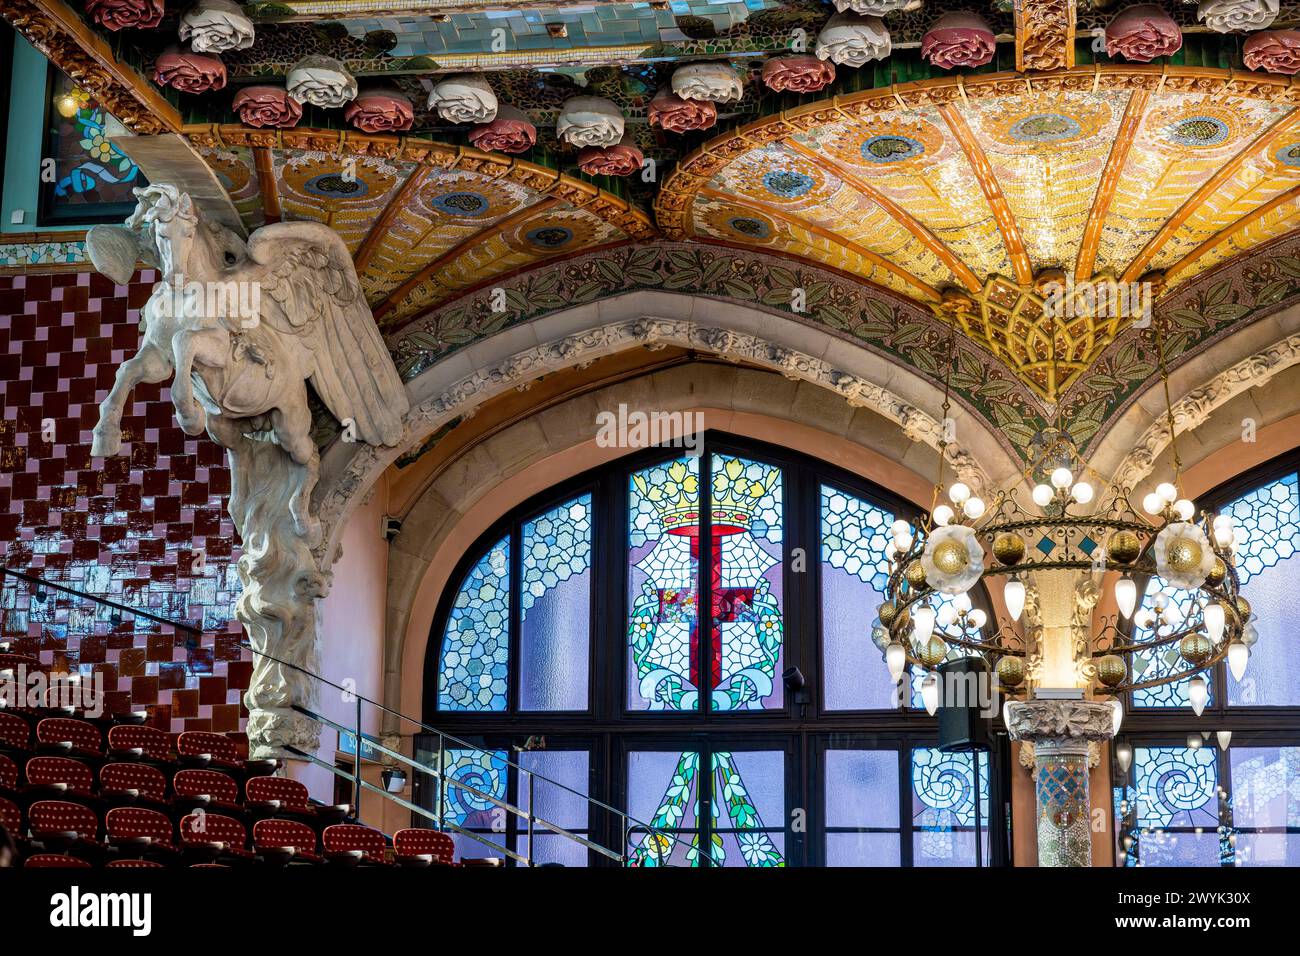 Spain, Catalonia, Barcelona, Palau de la Musica Catalana (Catalan Music Palace), concert hall designed by the architect of Catalan modernism Lluis Domènech i Montaner, a UNESCO World Heritage Site, Pegasus at the start of the second balcony Stock Photo